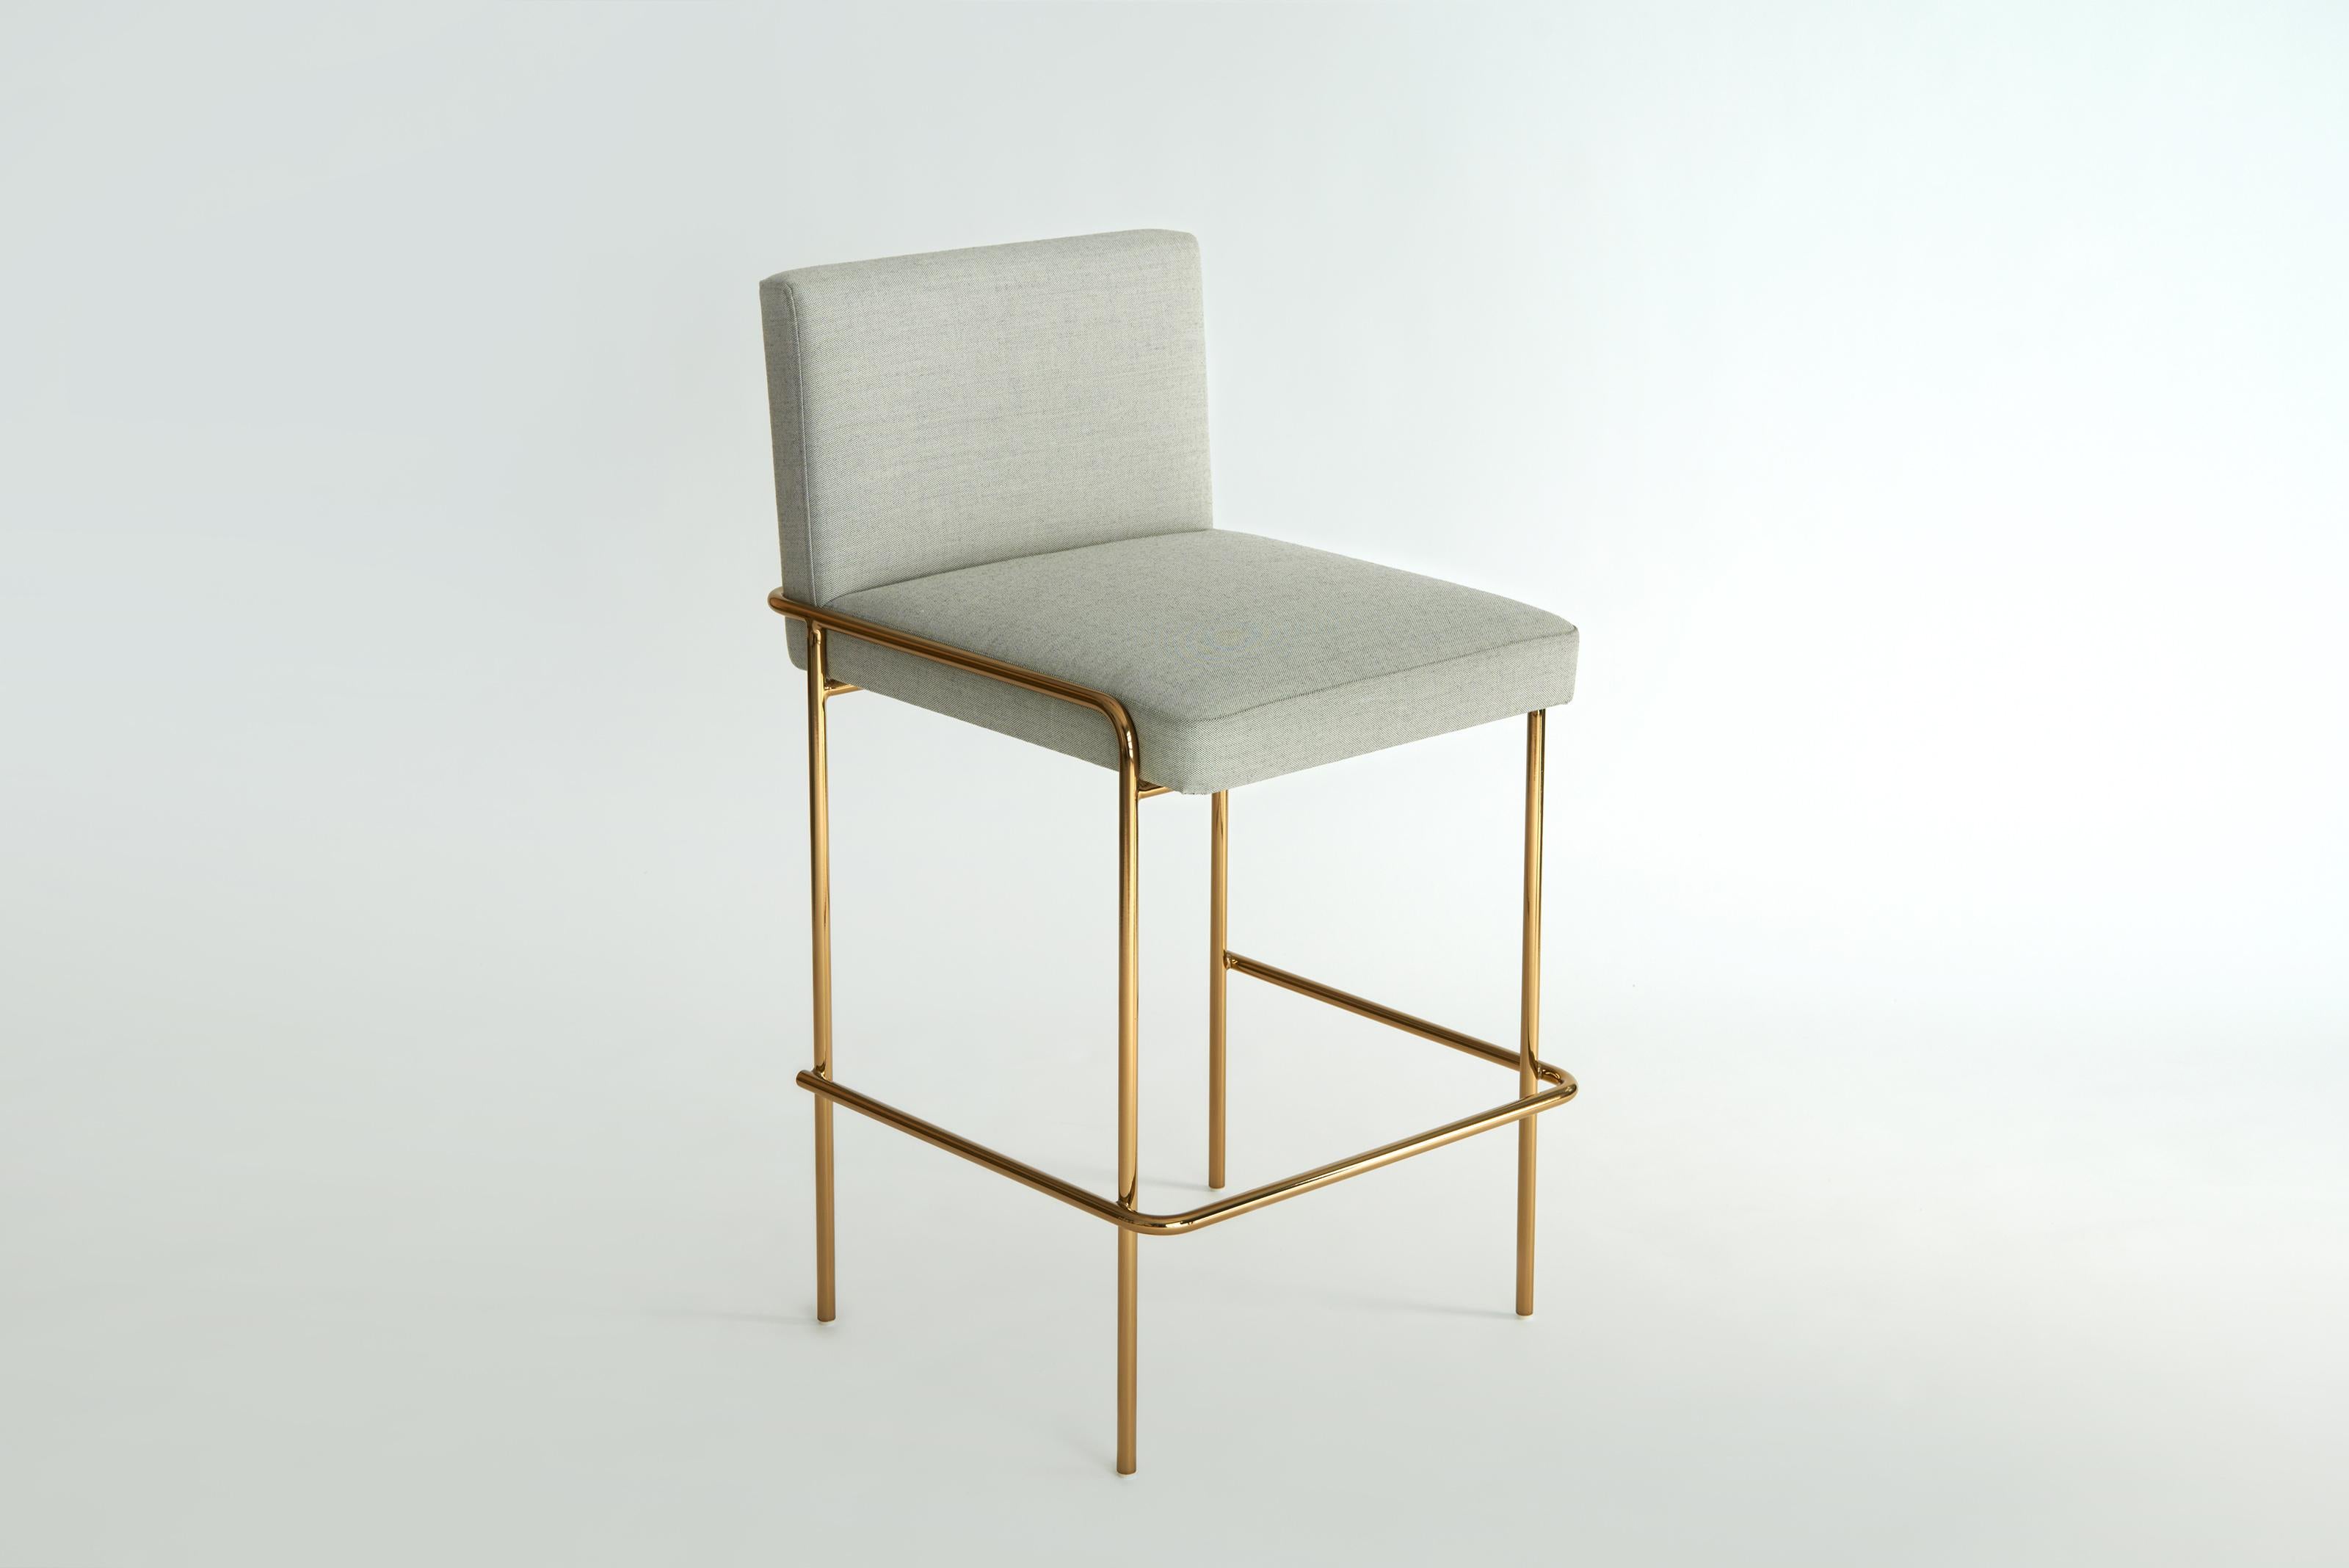 Trolley Counter Stool by Phase Design
Dimensions: D 54 x W 52.1 x H 88.9 cm. Seat Height: 63.5 cm.
Materials: Upholstery and smoked brass. 

Solid steel bar available in a smoked brass, polished chrome, burnt copper, or powder coat finish with